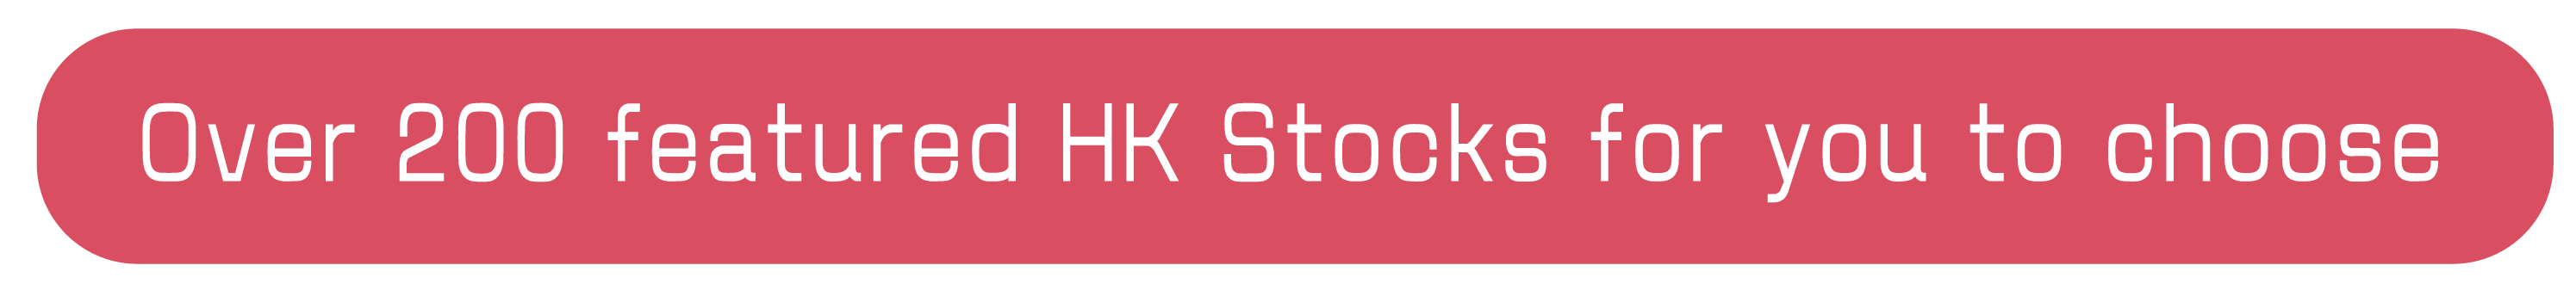 Over 200 featured HK Stocks for you to choose